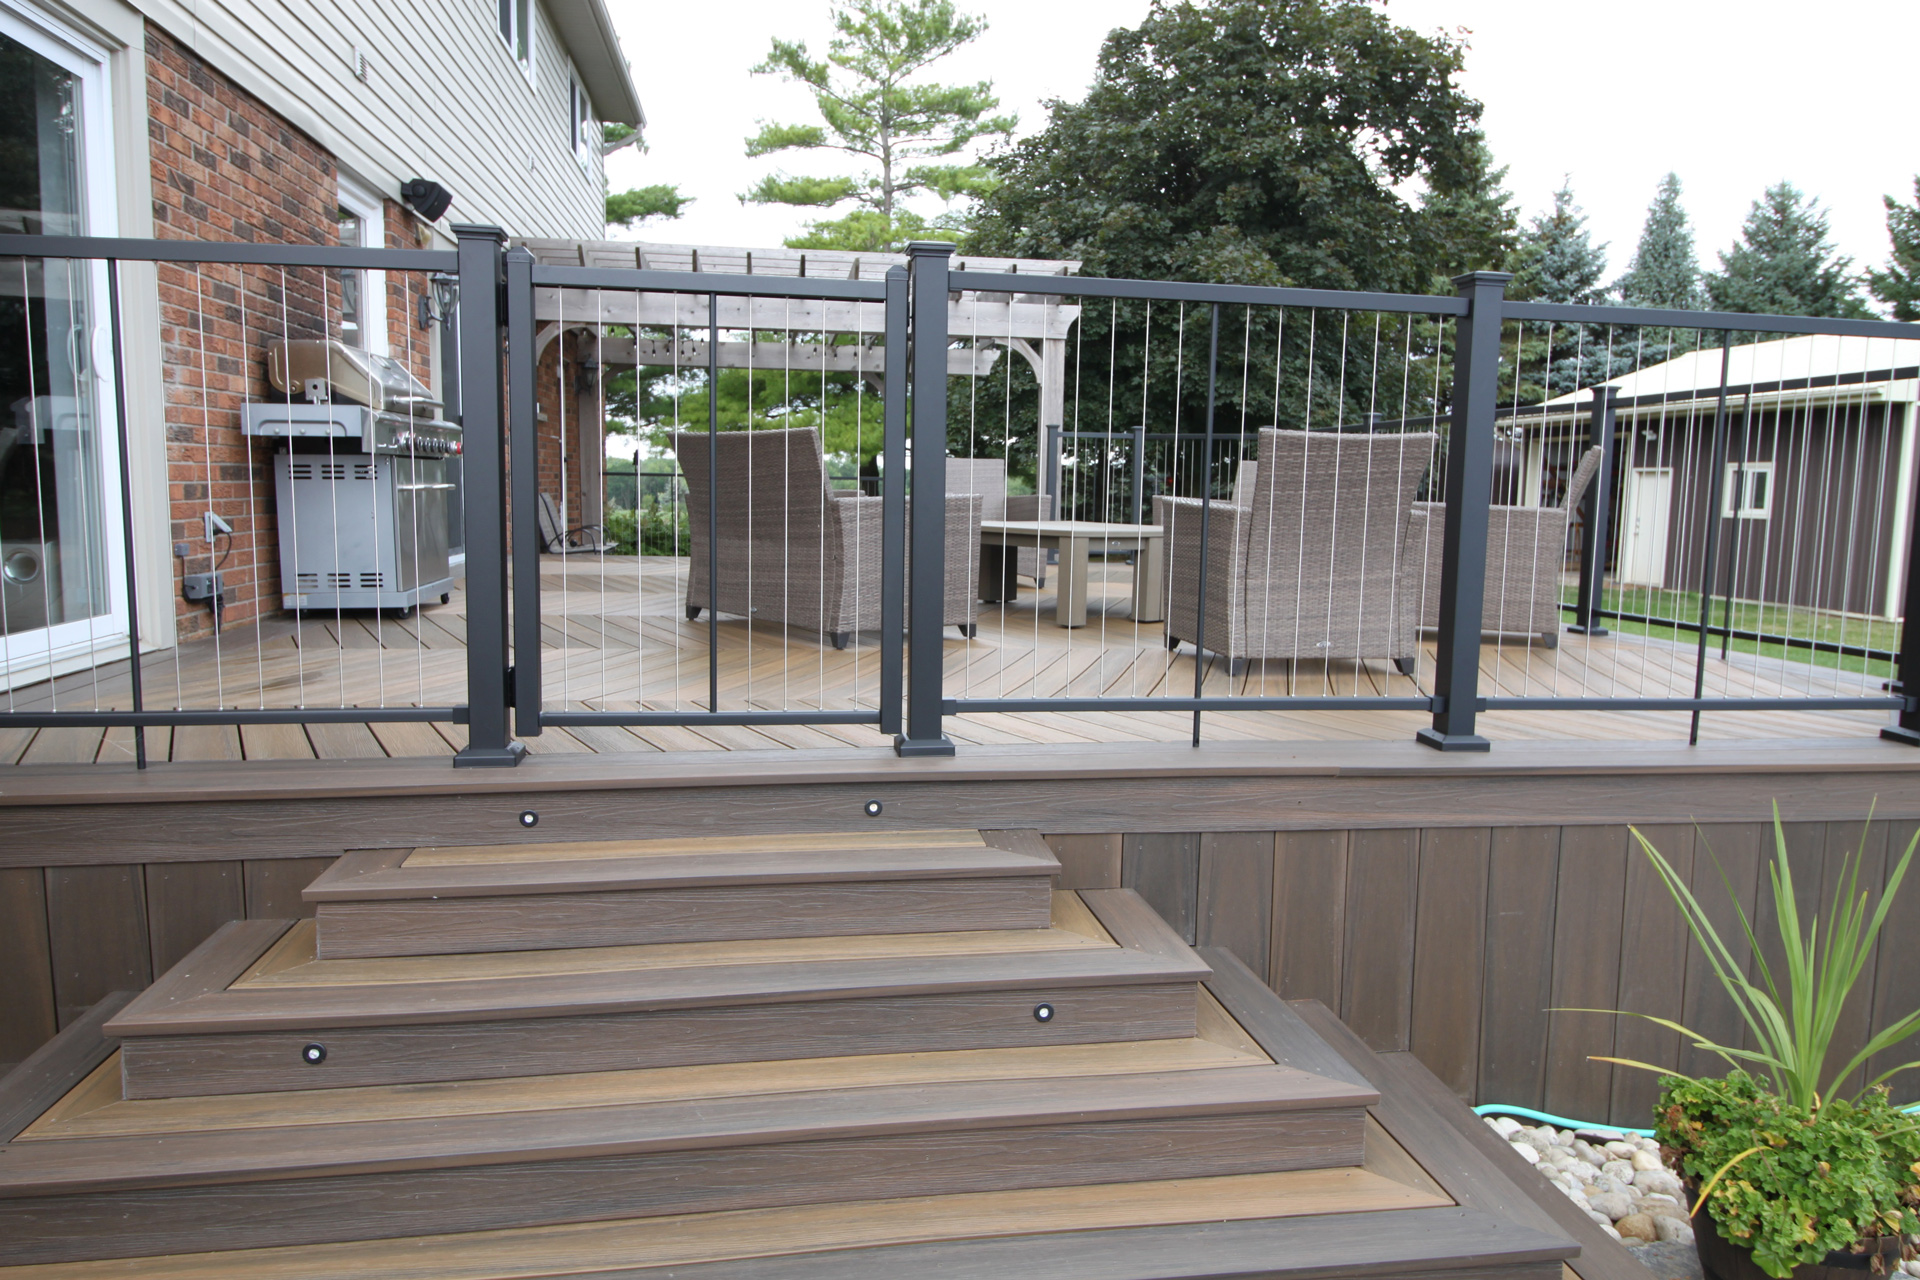 Deck stairs leading up to a deck with gated railing